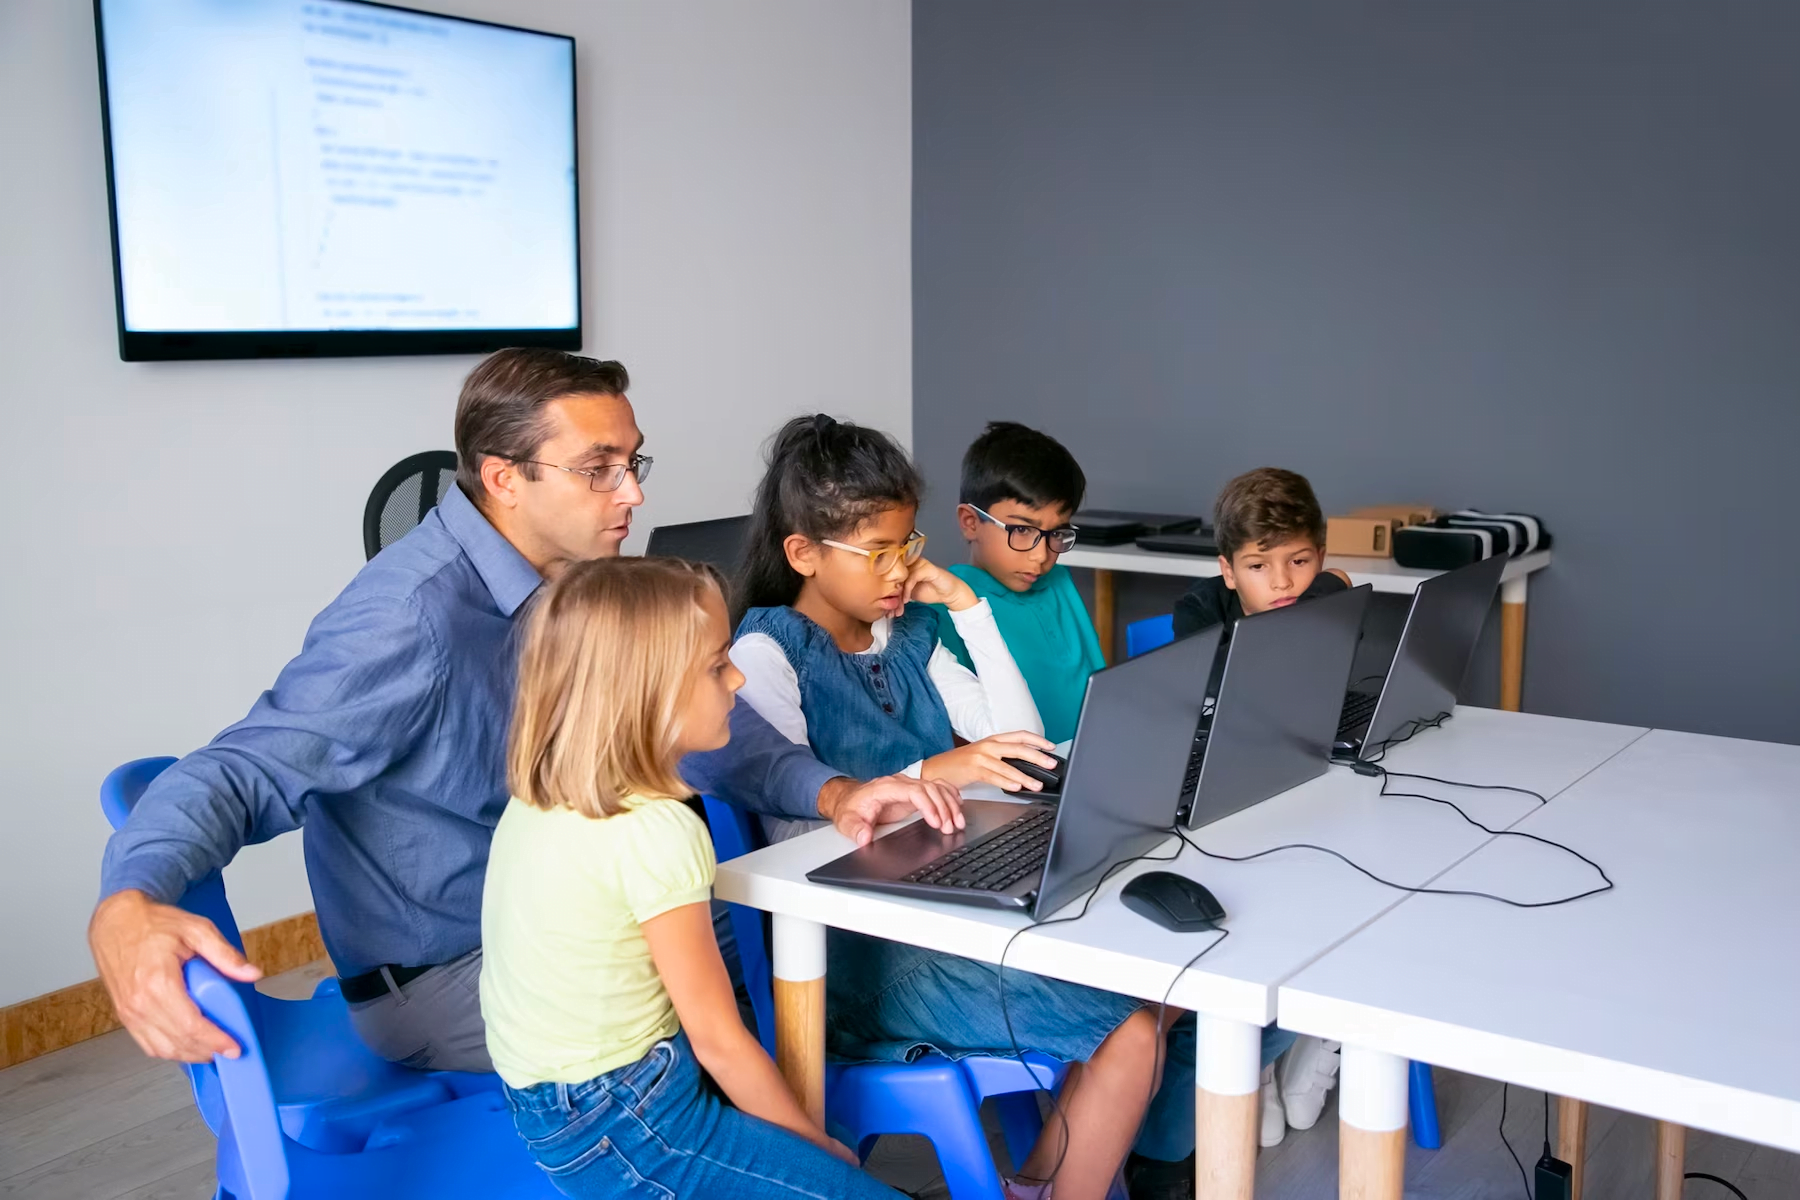 Teacher introducing technology to students as part of his classroom procedures